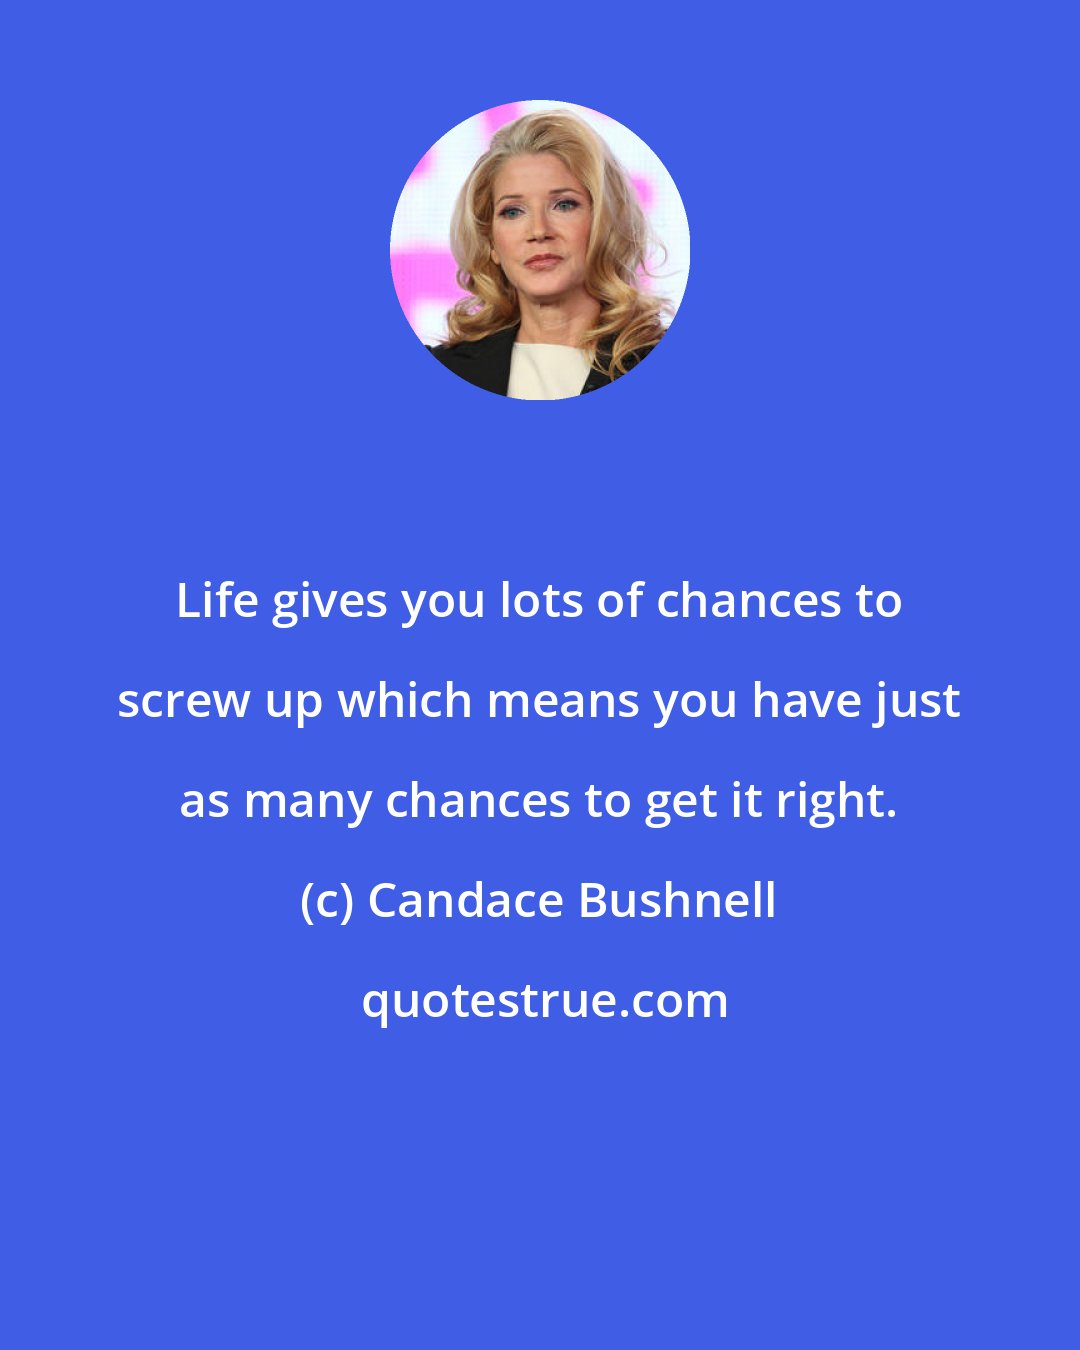 Candace Bushnell: Life gives you lots of chances to screw up which means you have just as many chances to get it right.